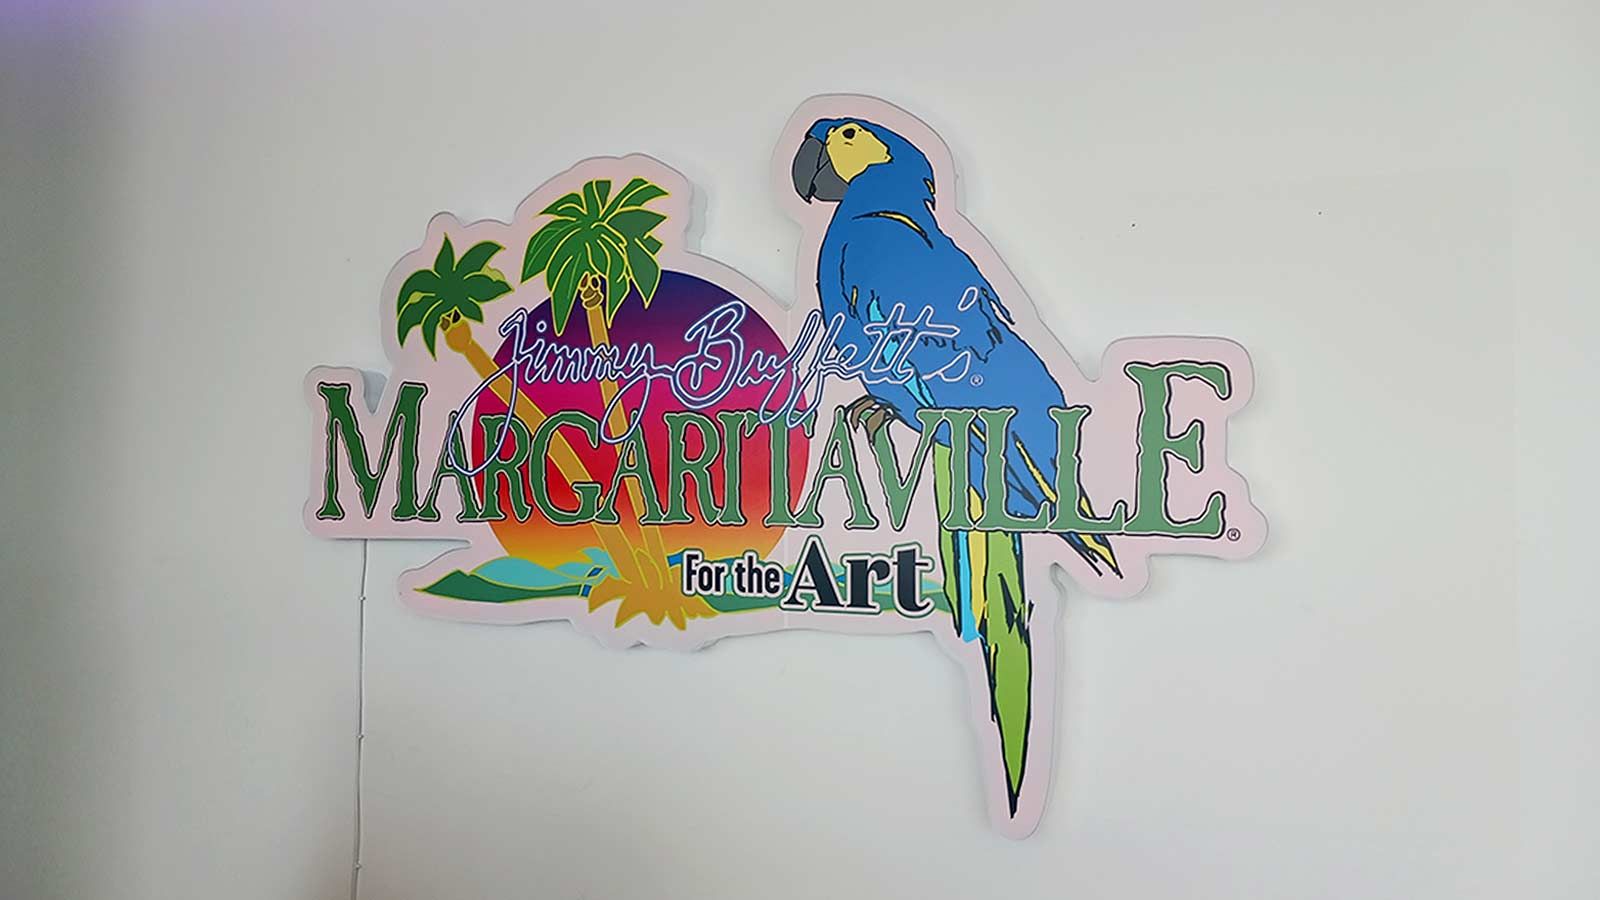 Margaritaville light up sign attached to the wall